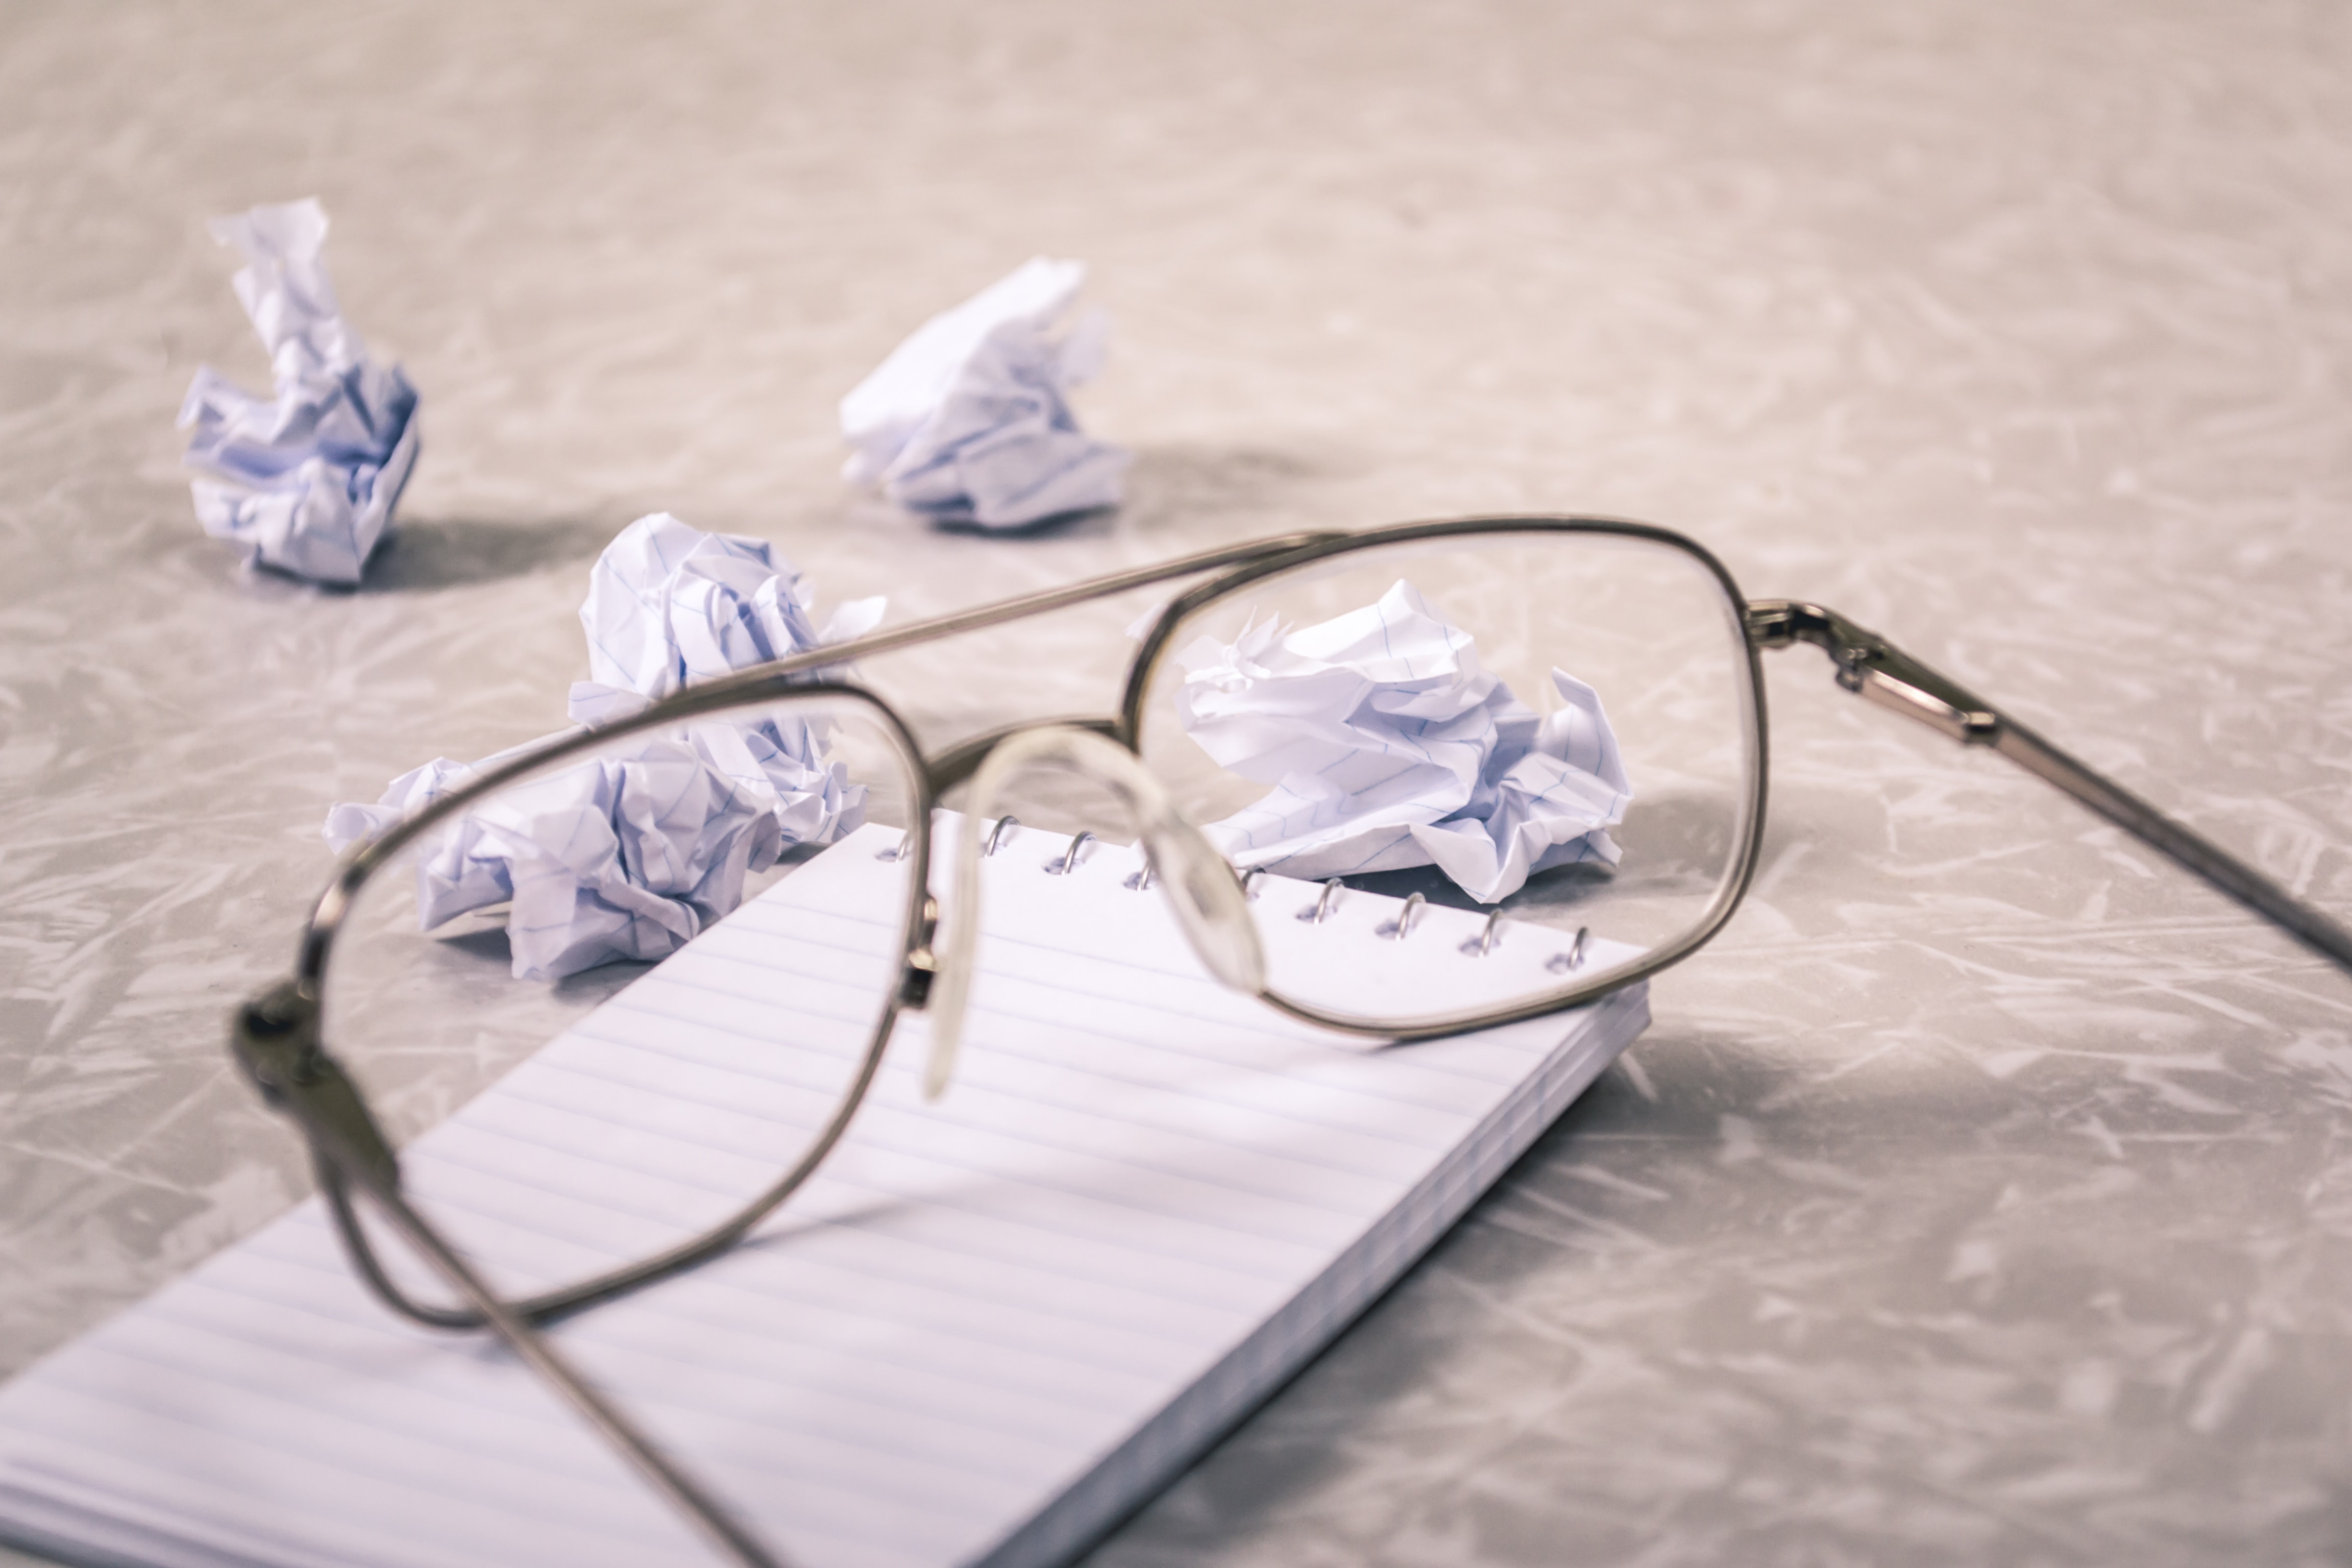 A pair of glasses left on a notepad. Littered with balls of crumpled up paper. 